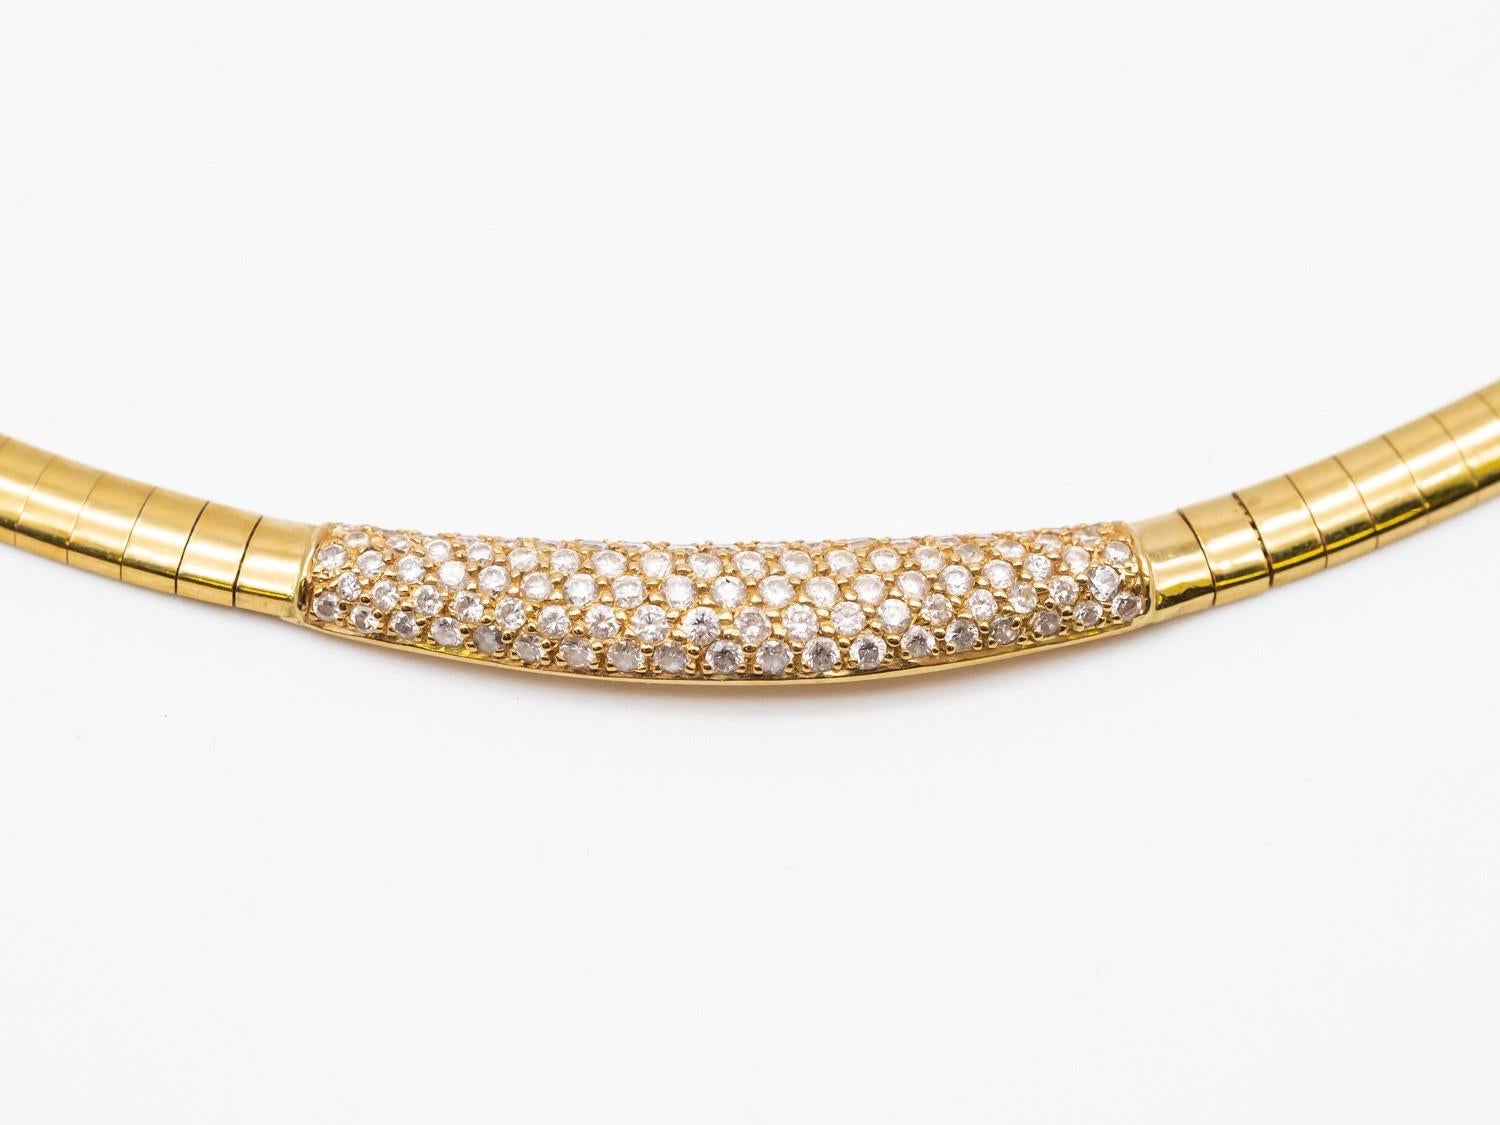 Semi-rigid 18K gold choker necklace omega mesh set with one paving diamonds.
This necklace measures 42 centimetre or 16.5354 inch it has the particularity as you see in the picture to pose perfectly on the base of the neck.
Diamonds add a special